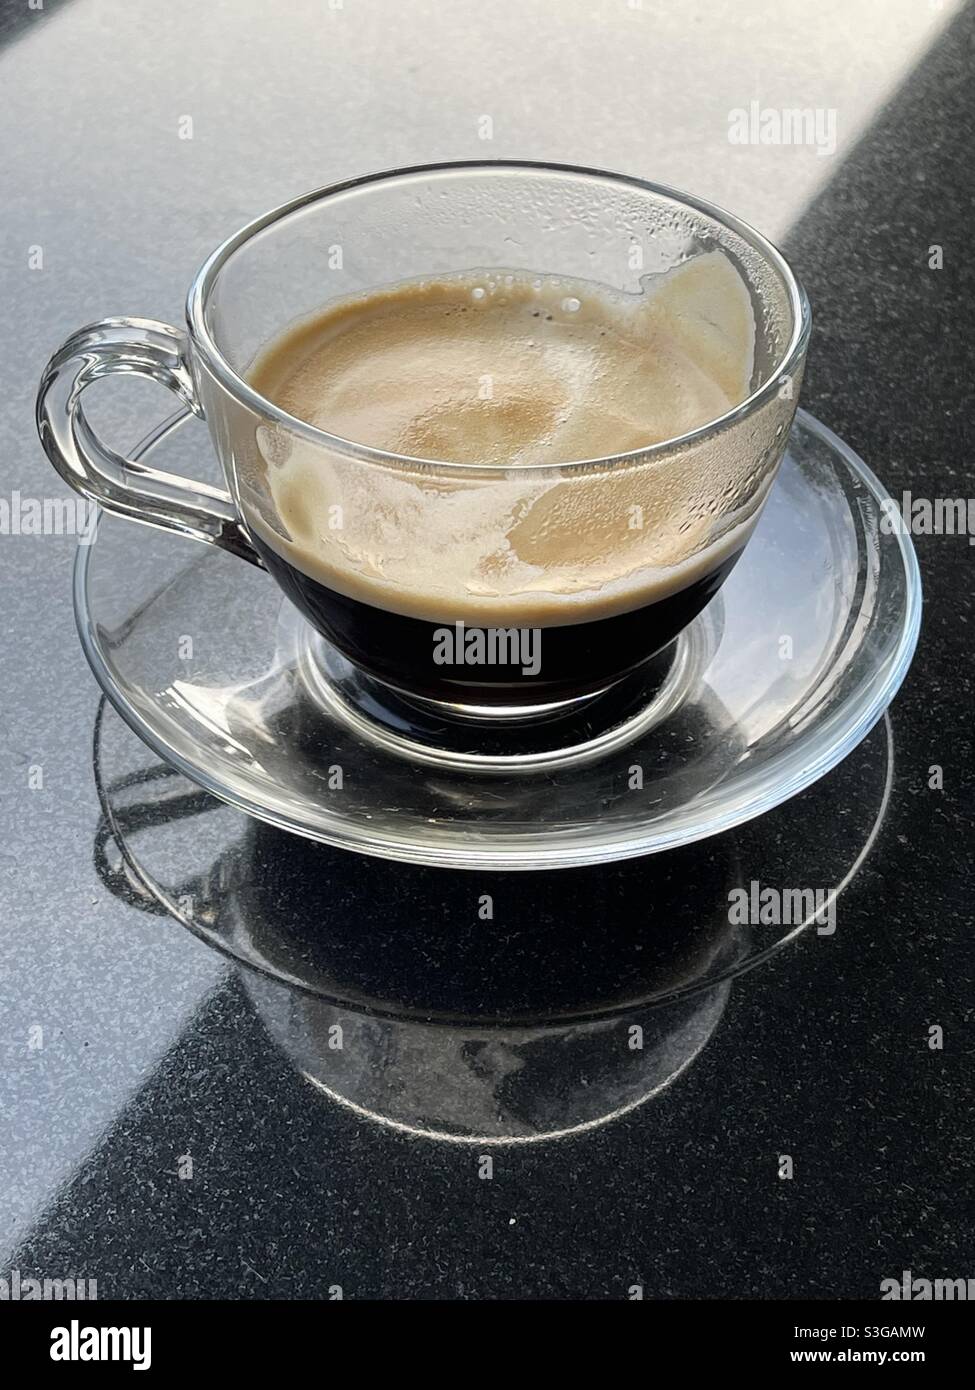 half-full cup of coffee Stock Photo